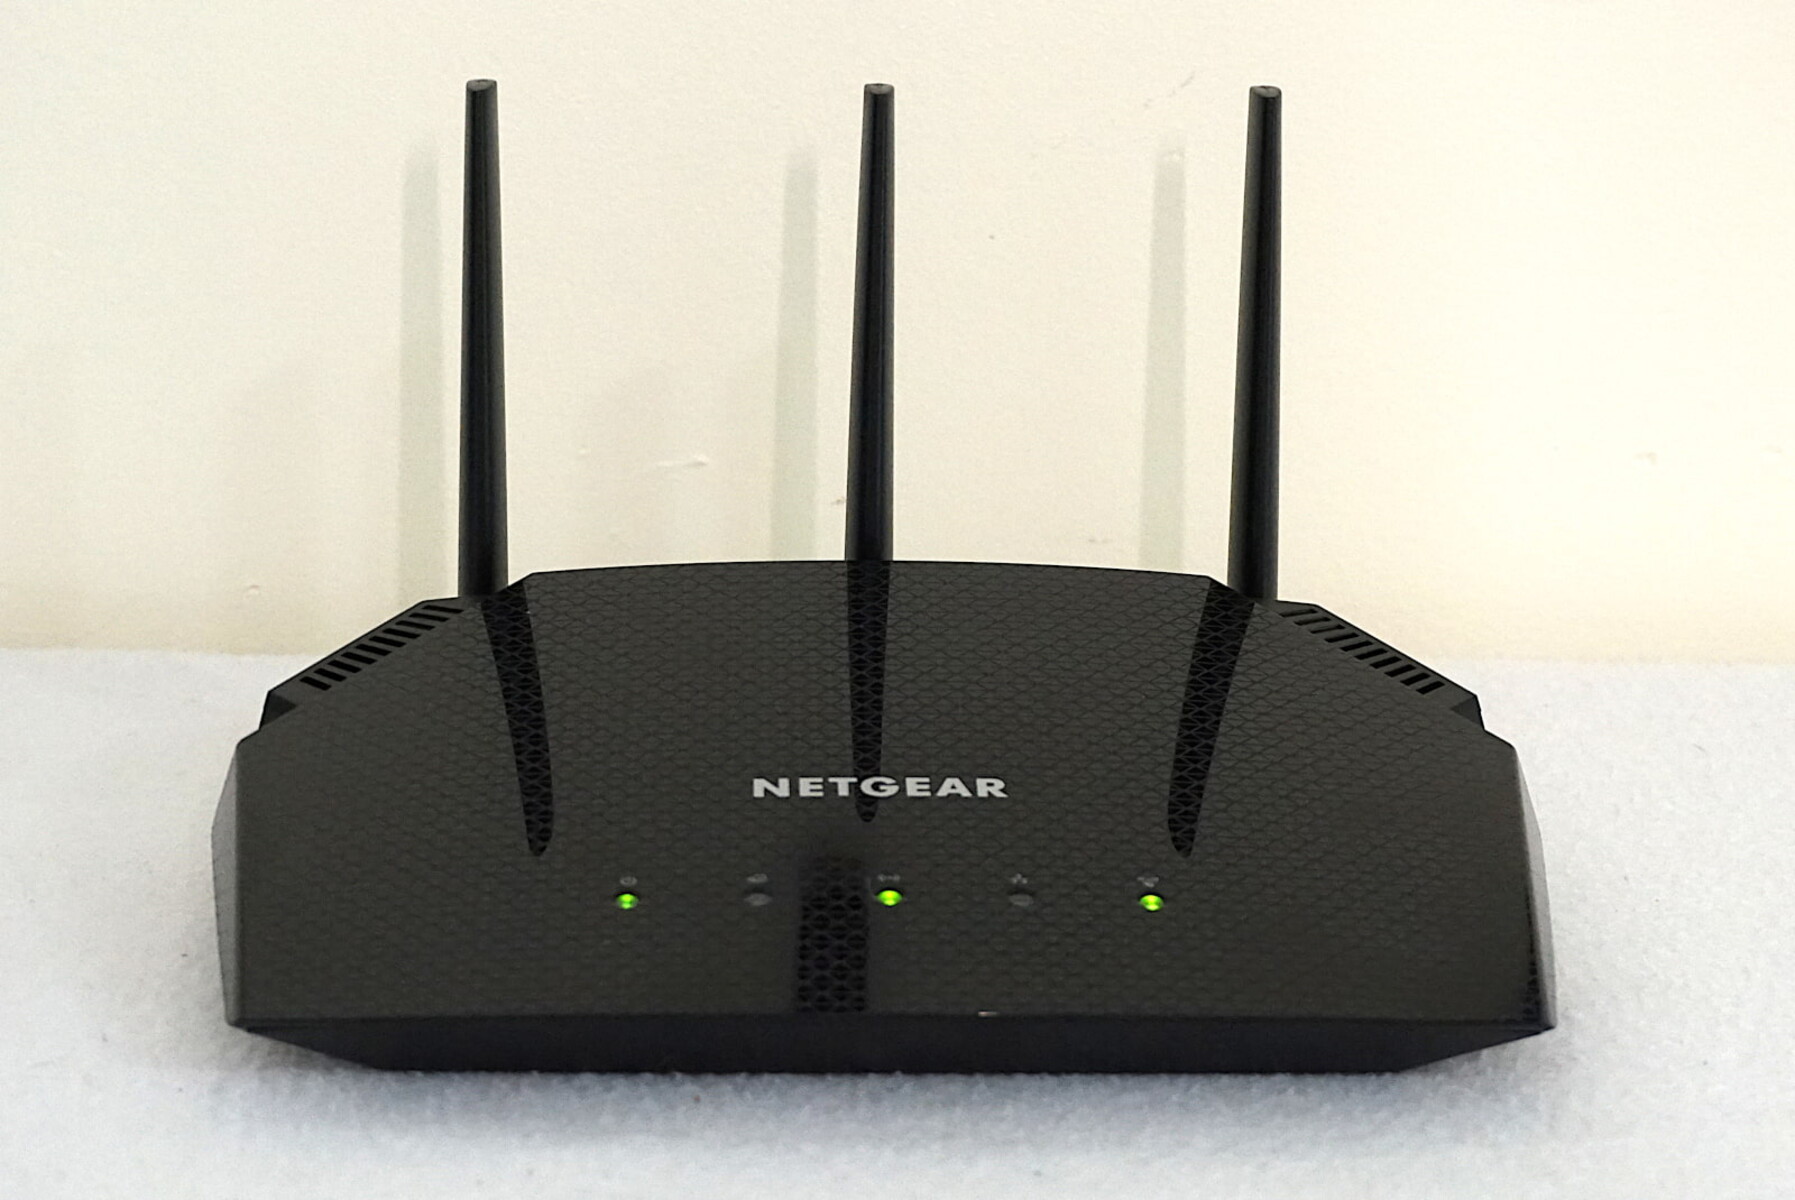 How To Change Channel On Netgear Wireless Router